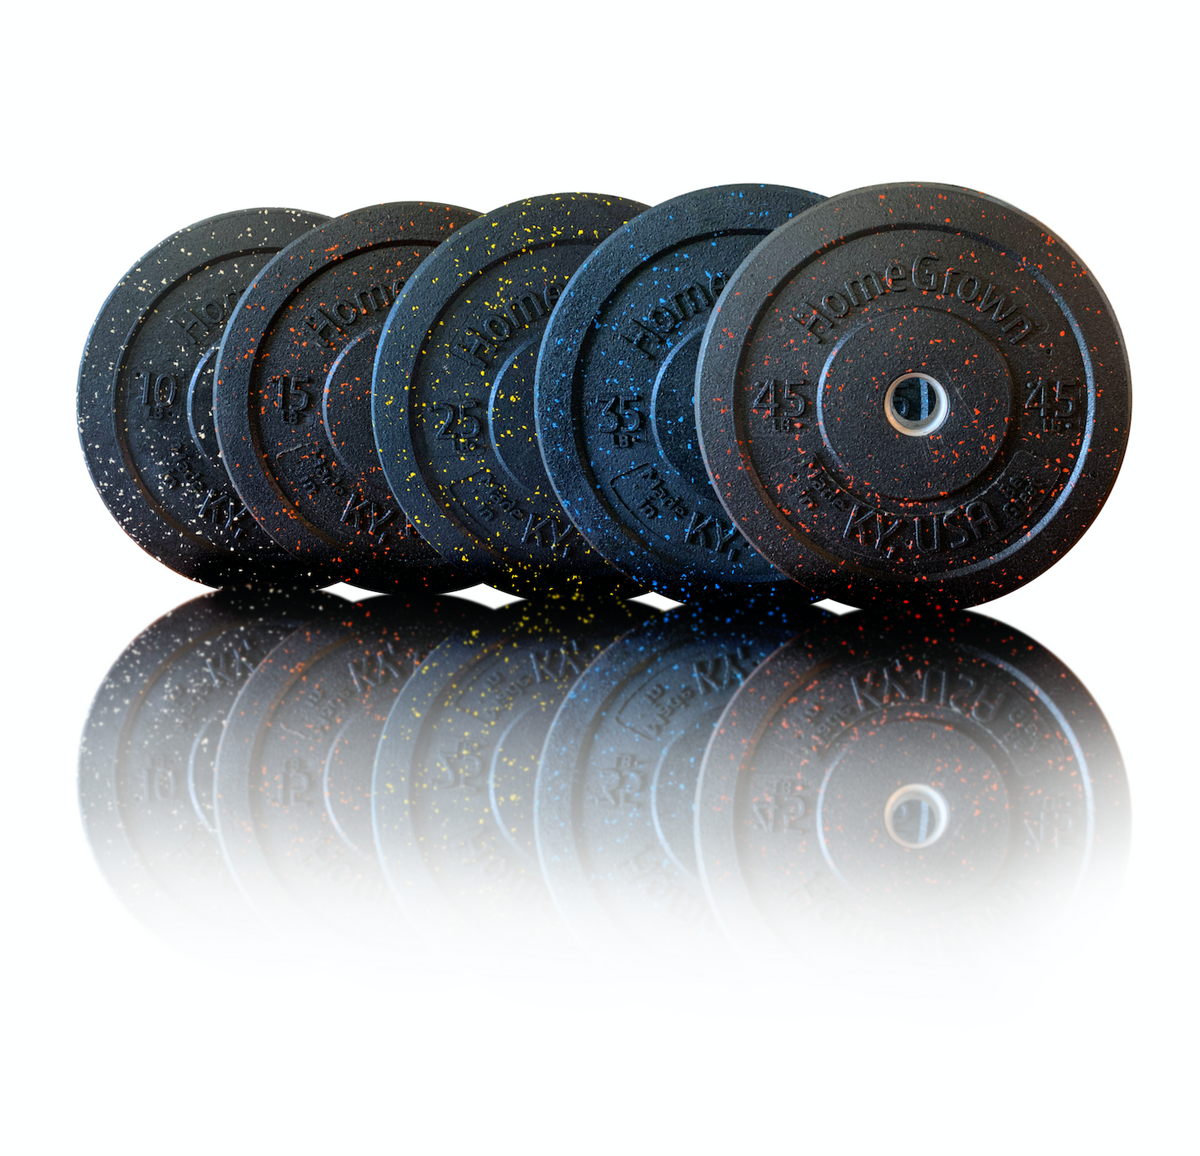 Bumper Plate Sets | Quality Tested, American Made, Lowest Cost